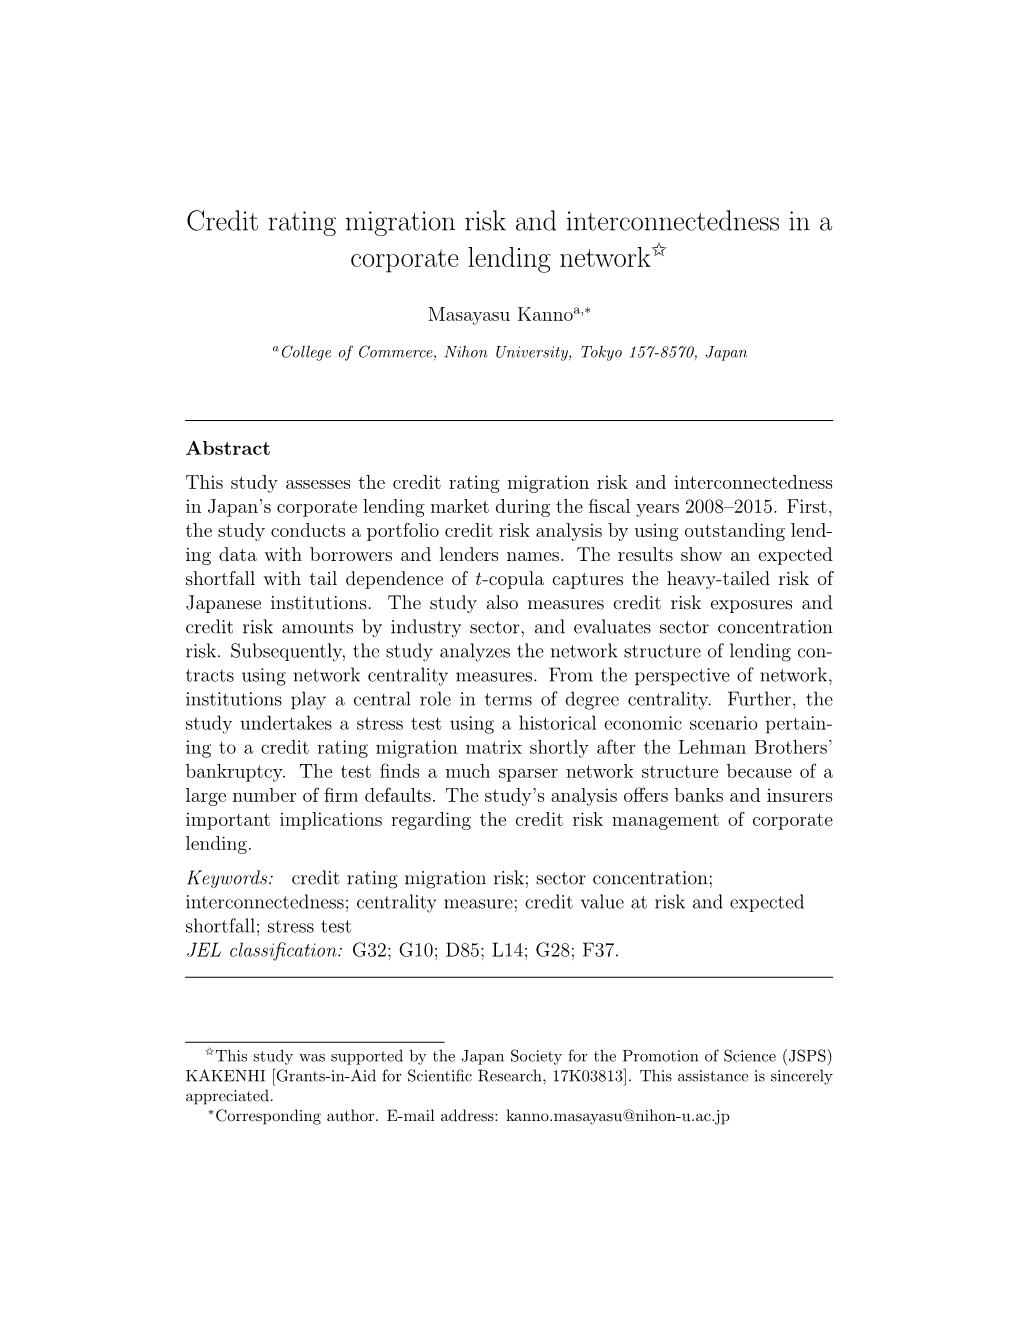 Credit Rating Migration Risk and Interconnectedness in a Corporate Lending Network$